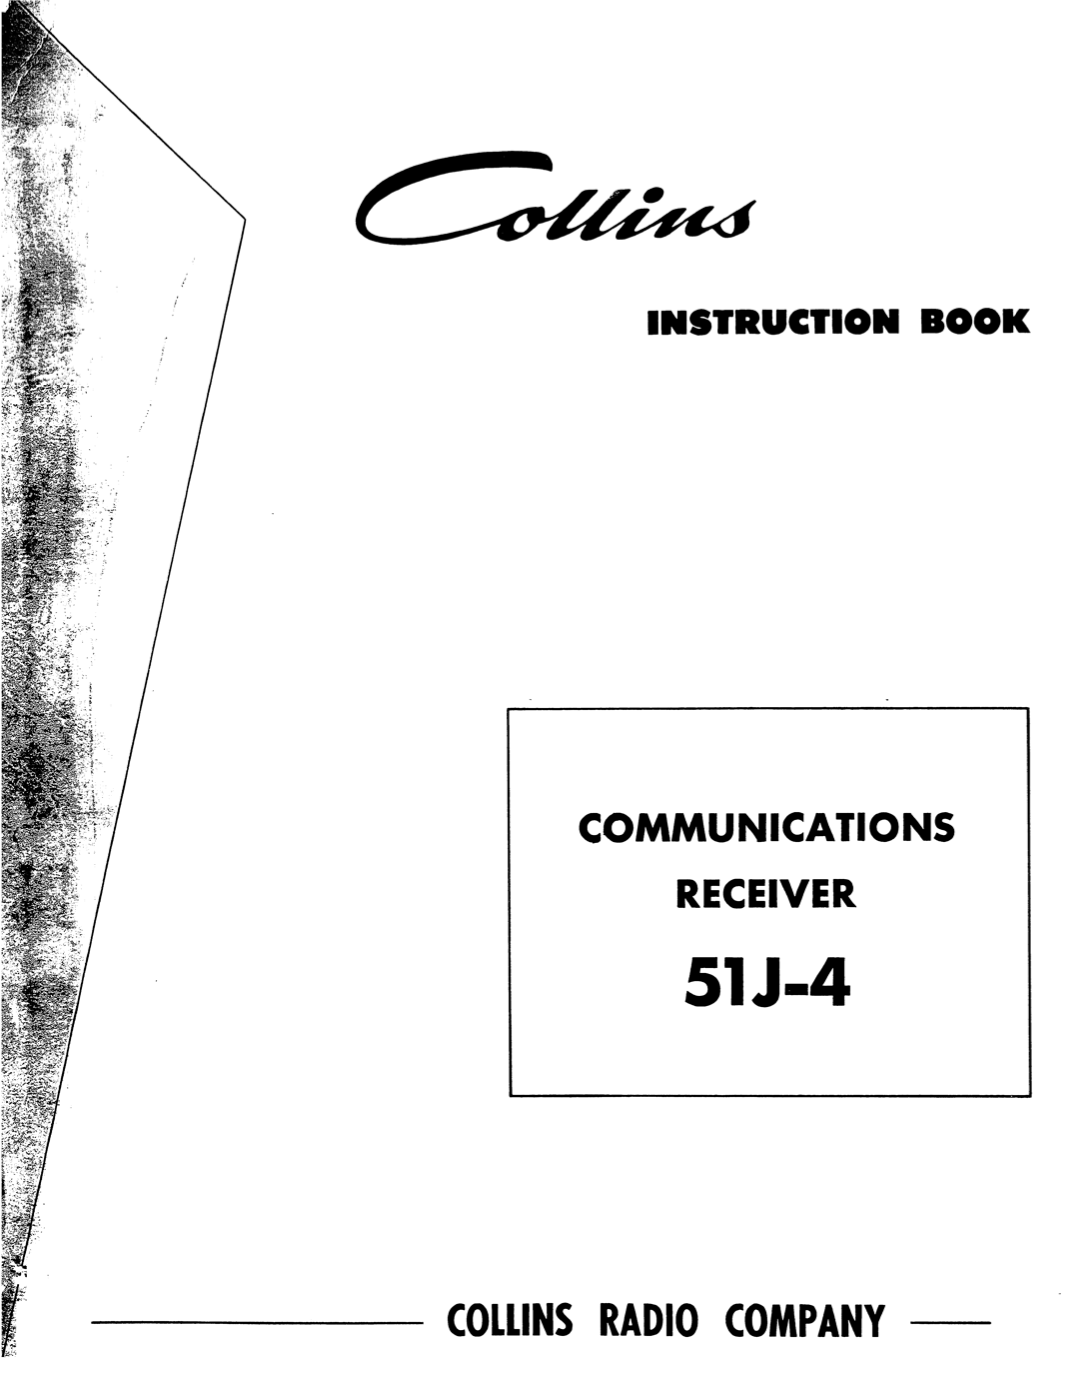 Collins 51J-4 Communications Receiver - Instruction Manual (4th Edition) 1